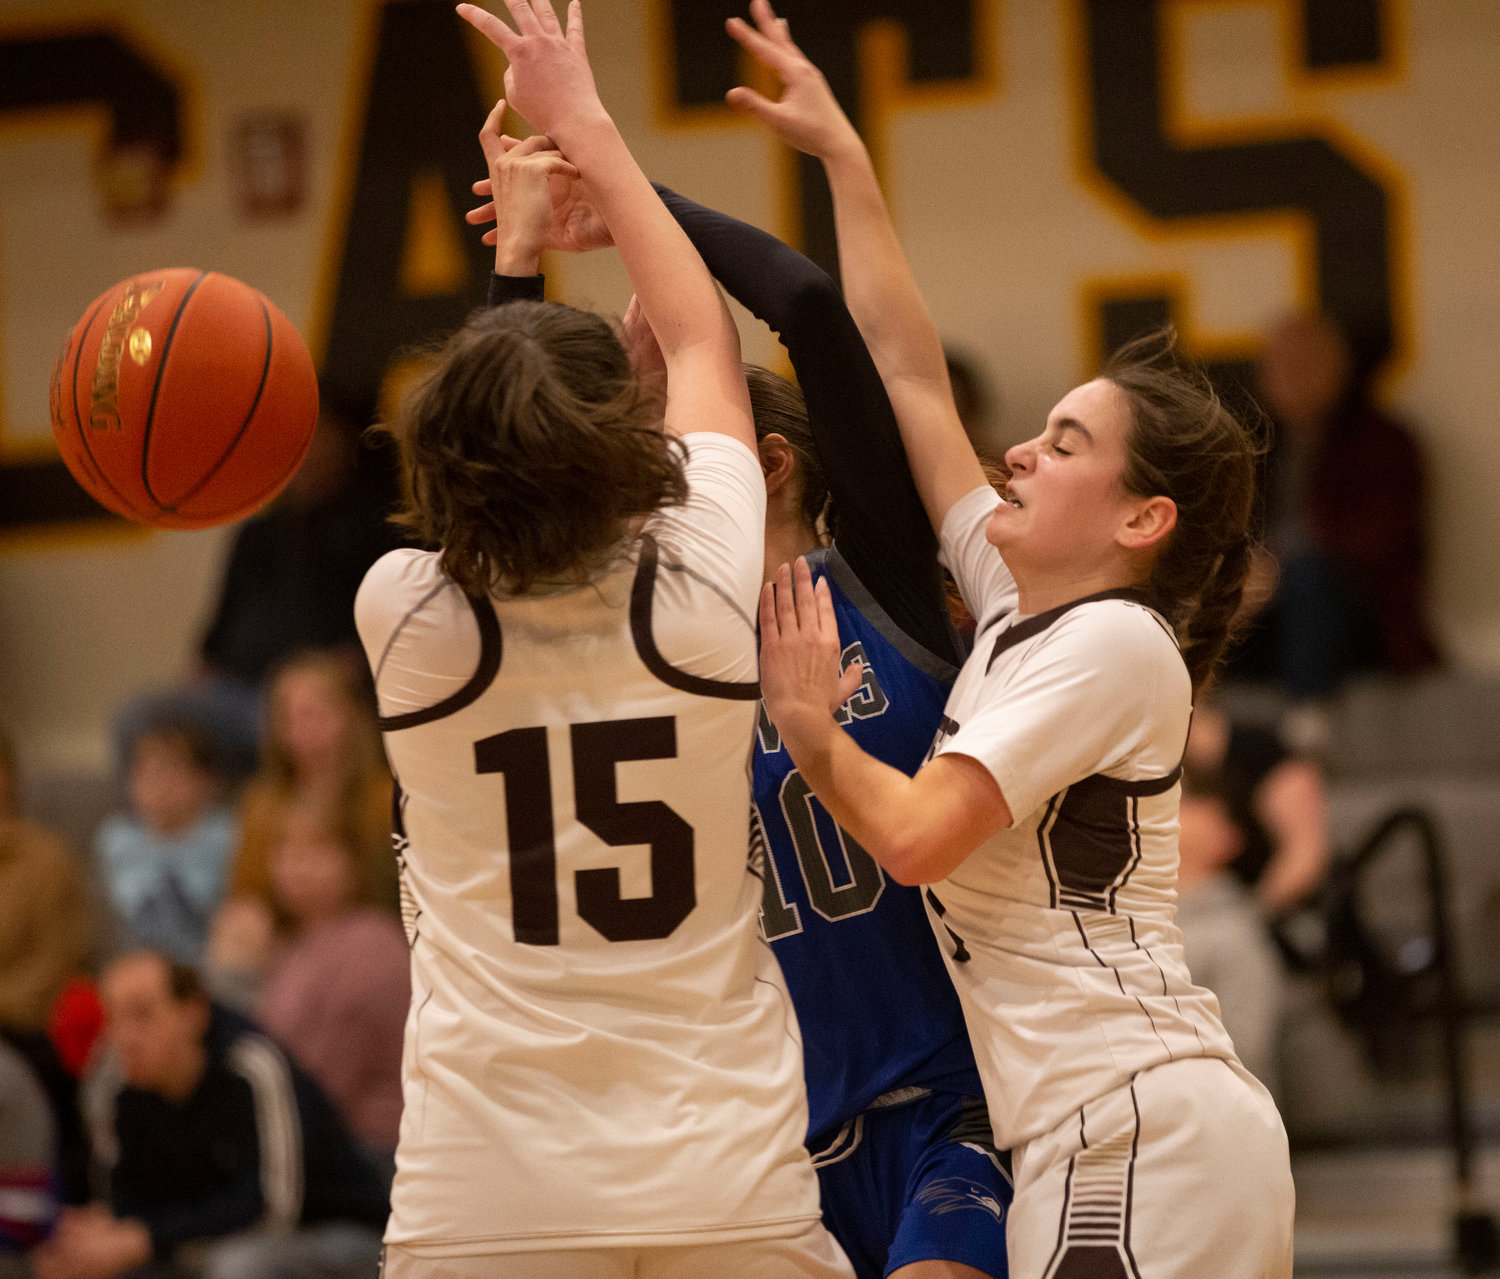 Meghan Lolloy (left) and Julia George fight for a rebound.